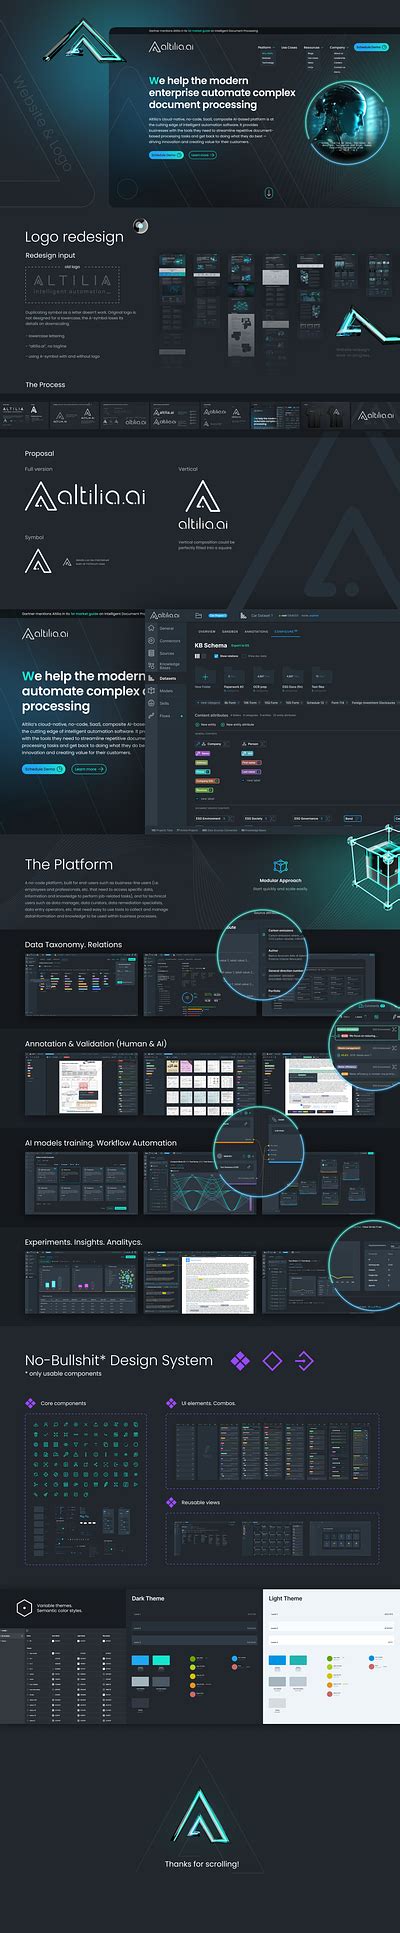 Rpa Designs Themes Templates And Downloadable Graphic Elements On